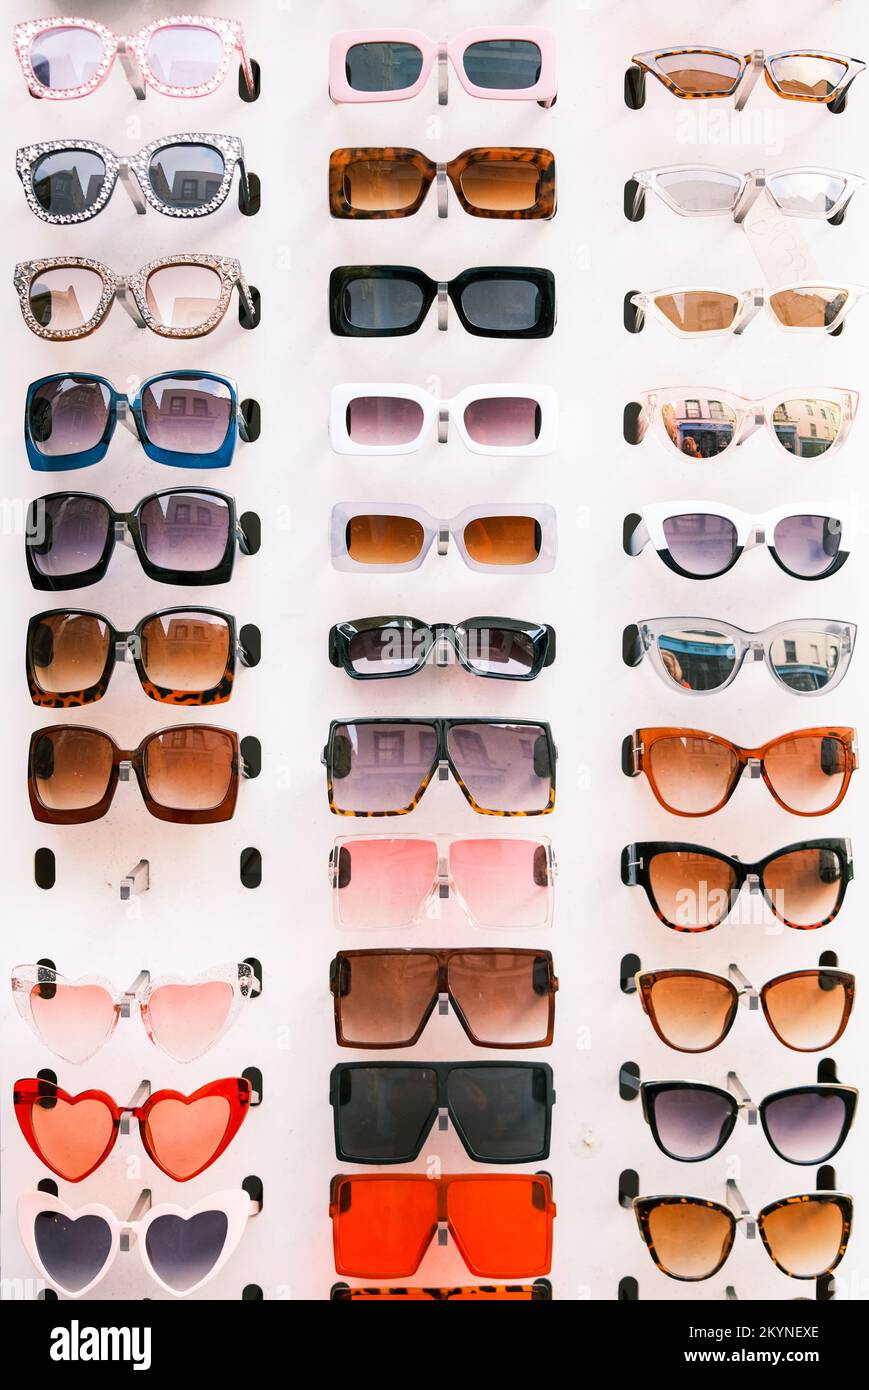 Vintage or Retro Sunglasses for Sale, Margate Old Town, UK Stock Photo